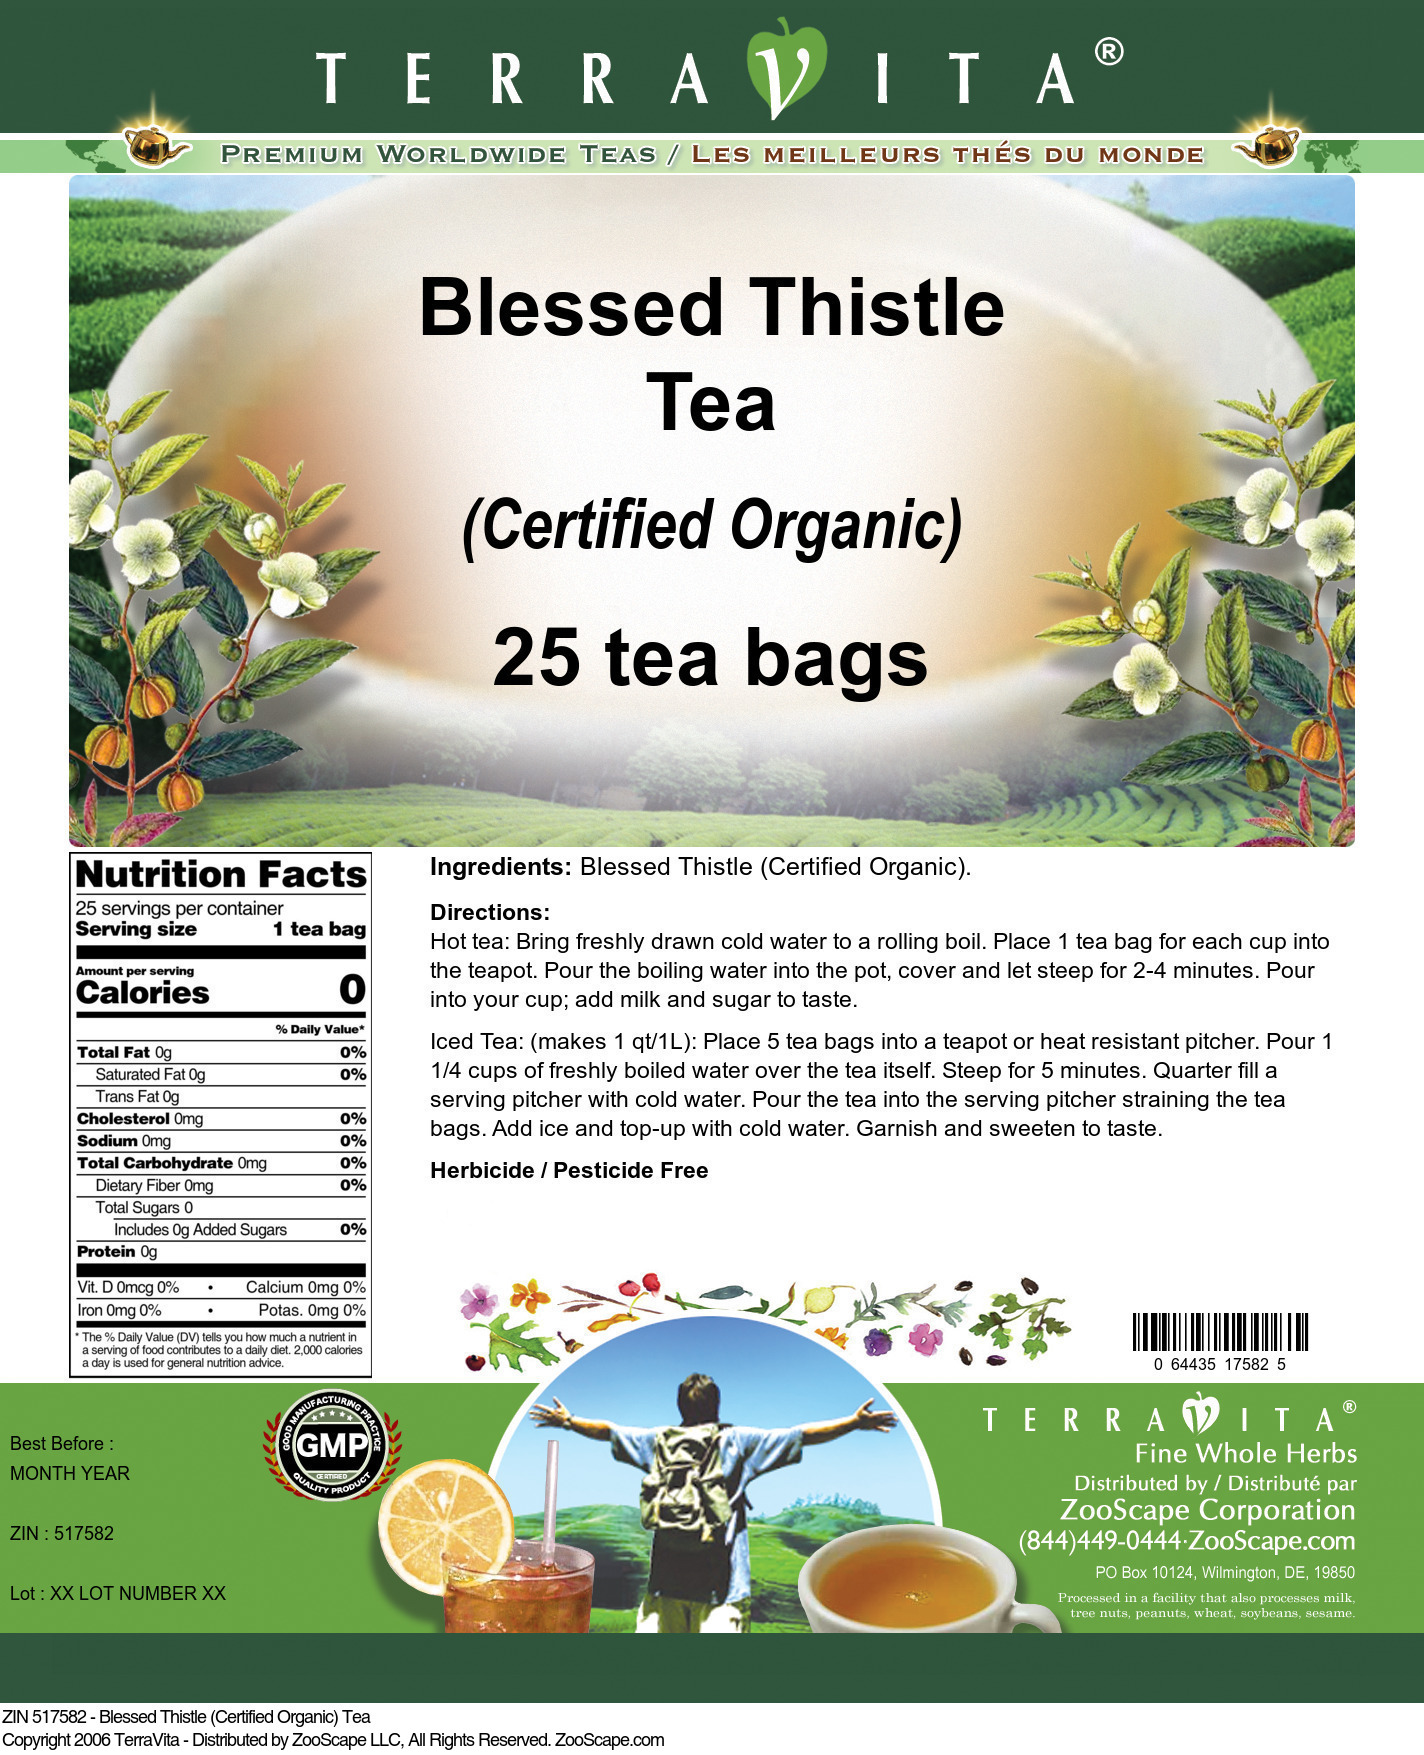 Blessed Thistle (Certified Organic) Tea - Label